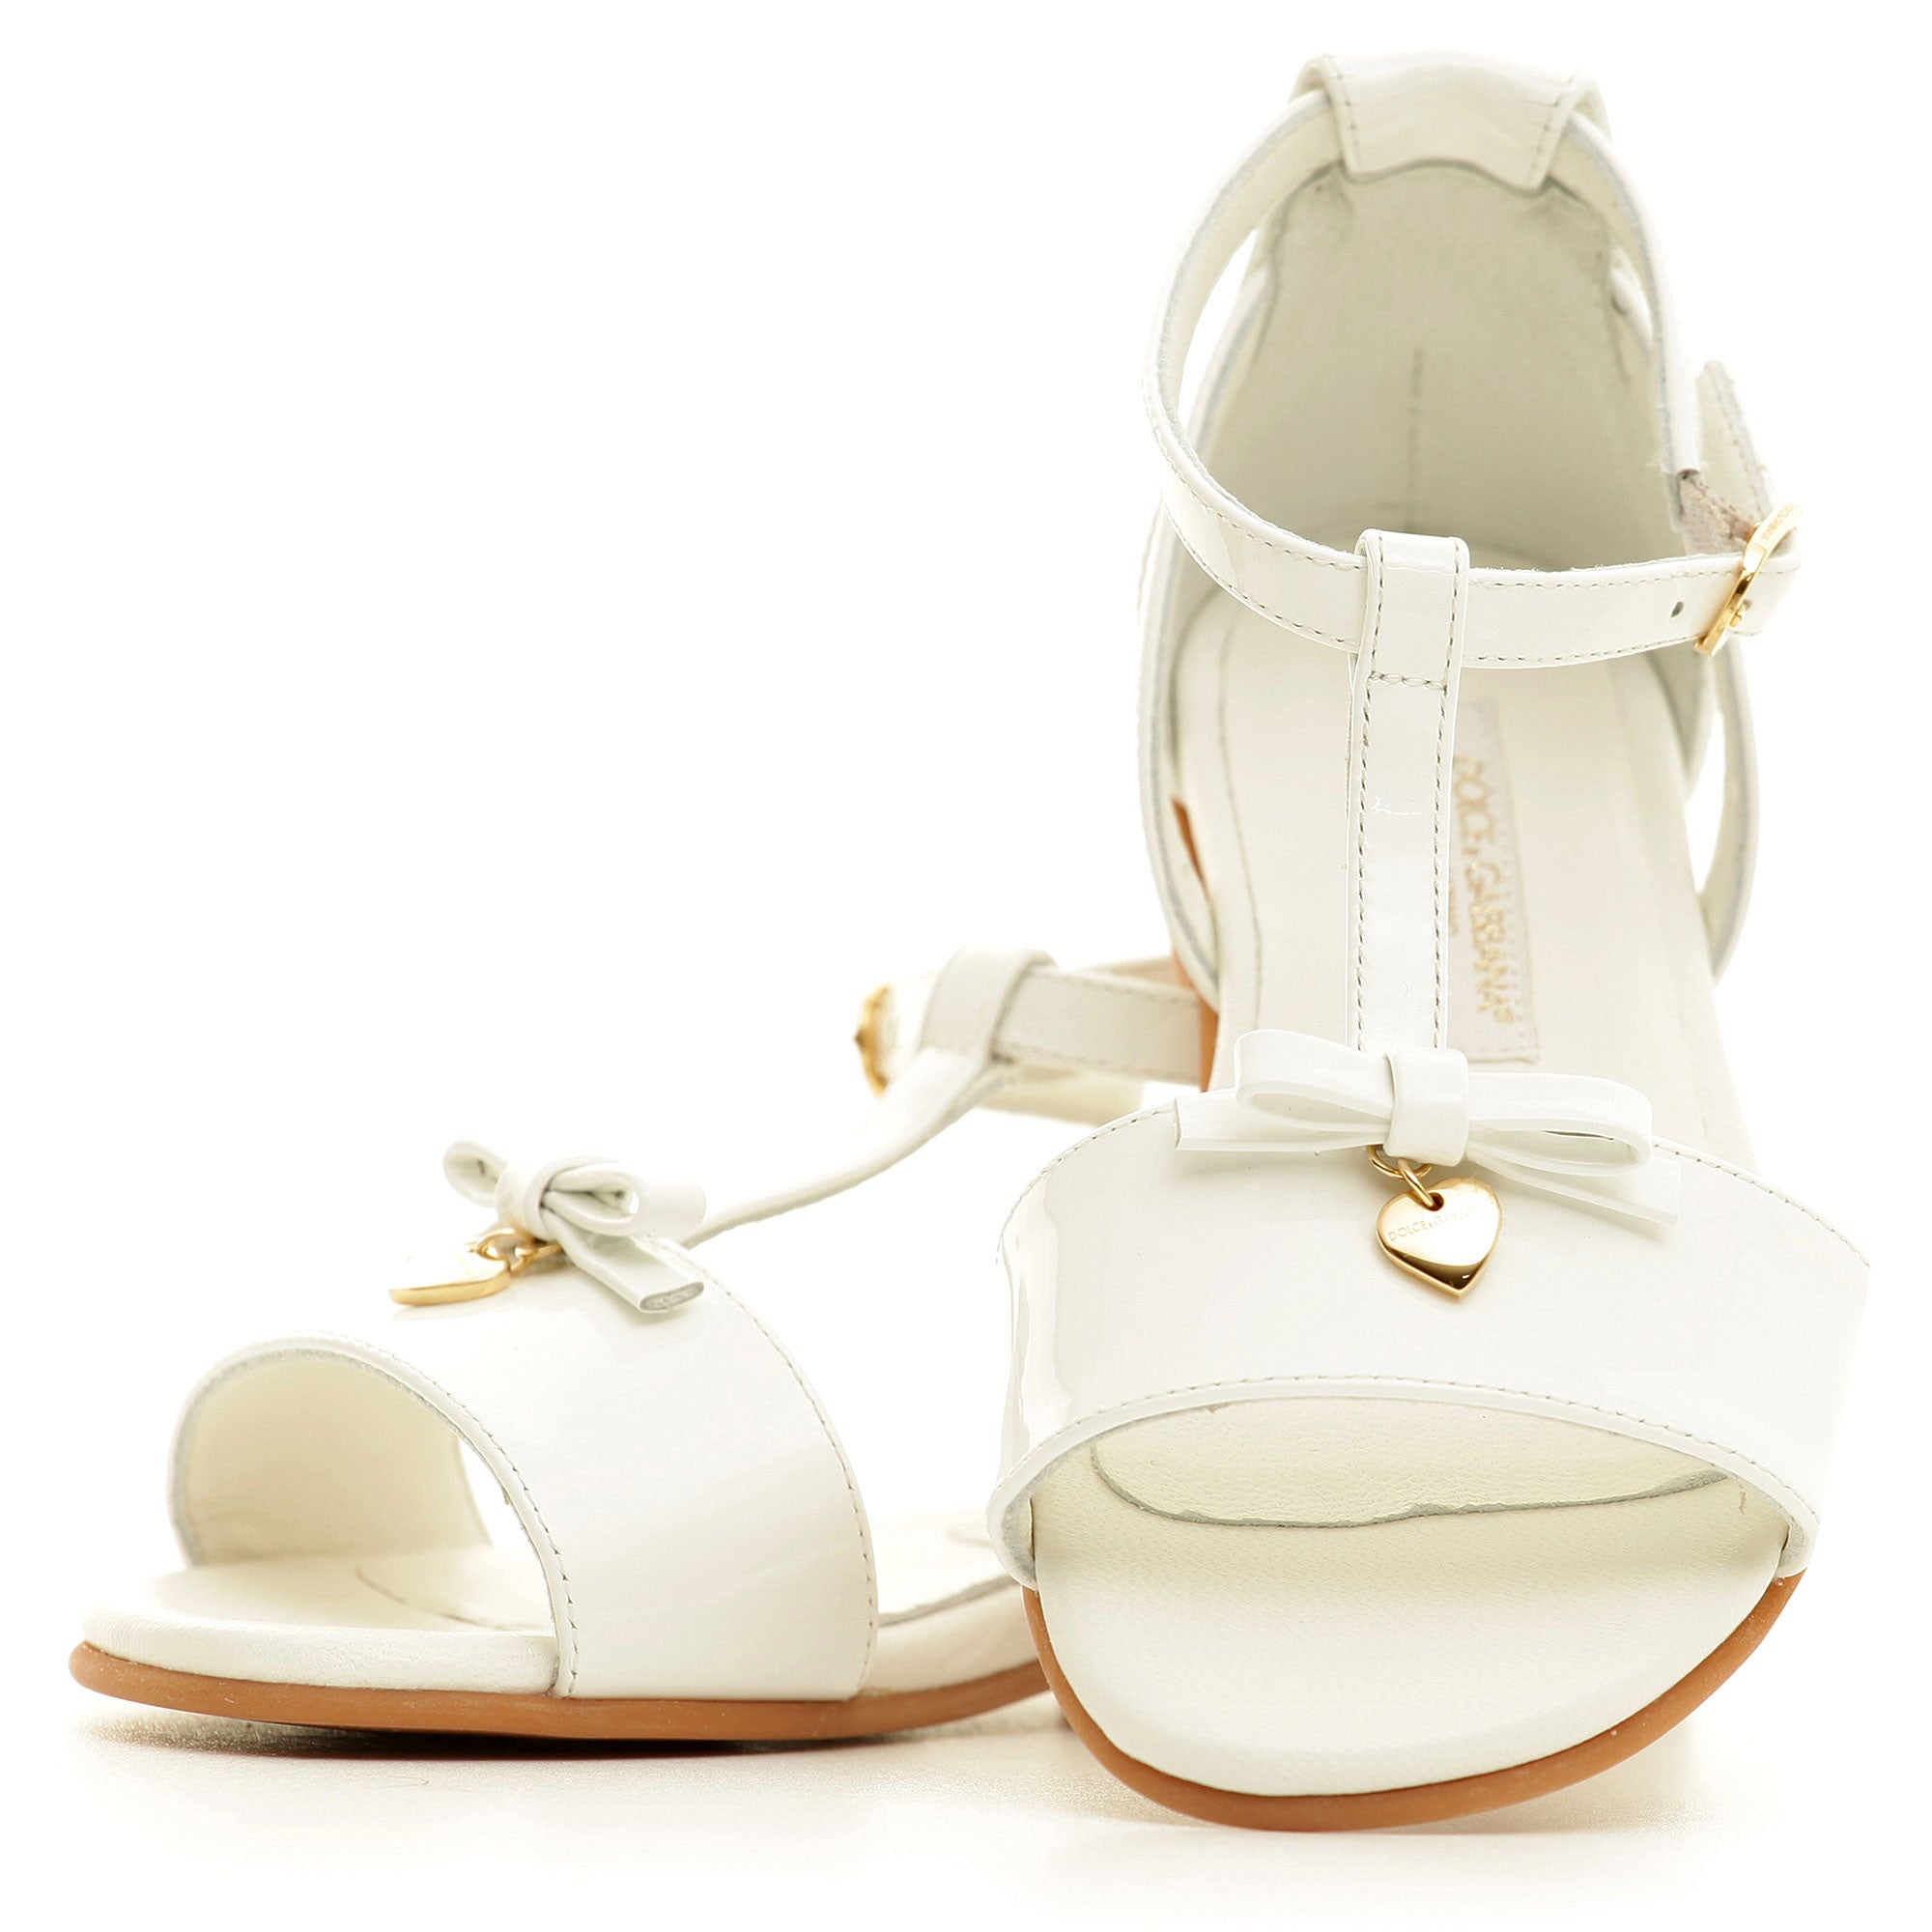 Girls Ivory Leateher Sandal With Gold Metal Heart Trims - CÉMAROSE | Children's Fashion Store - 1